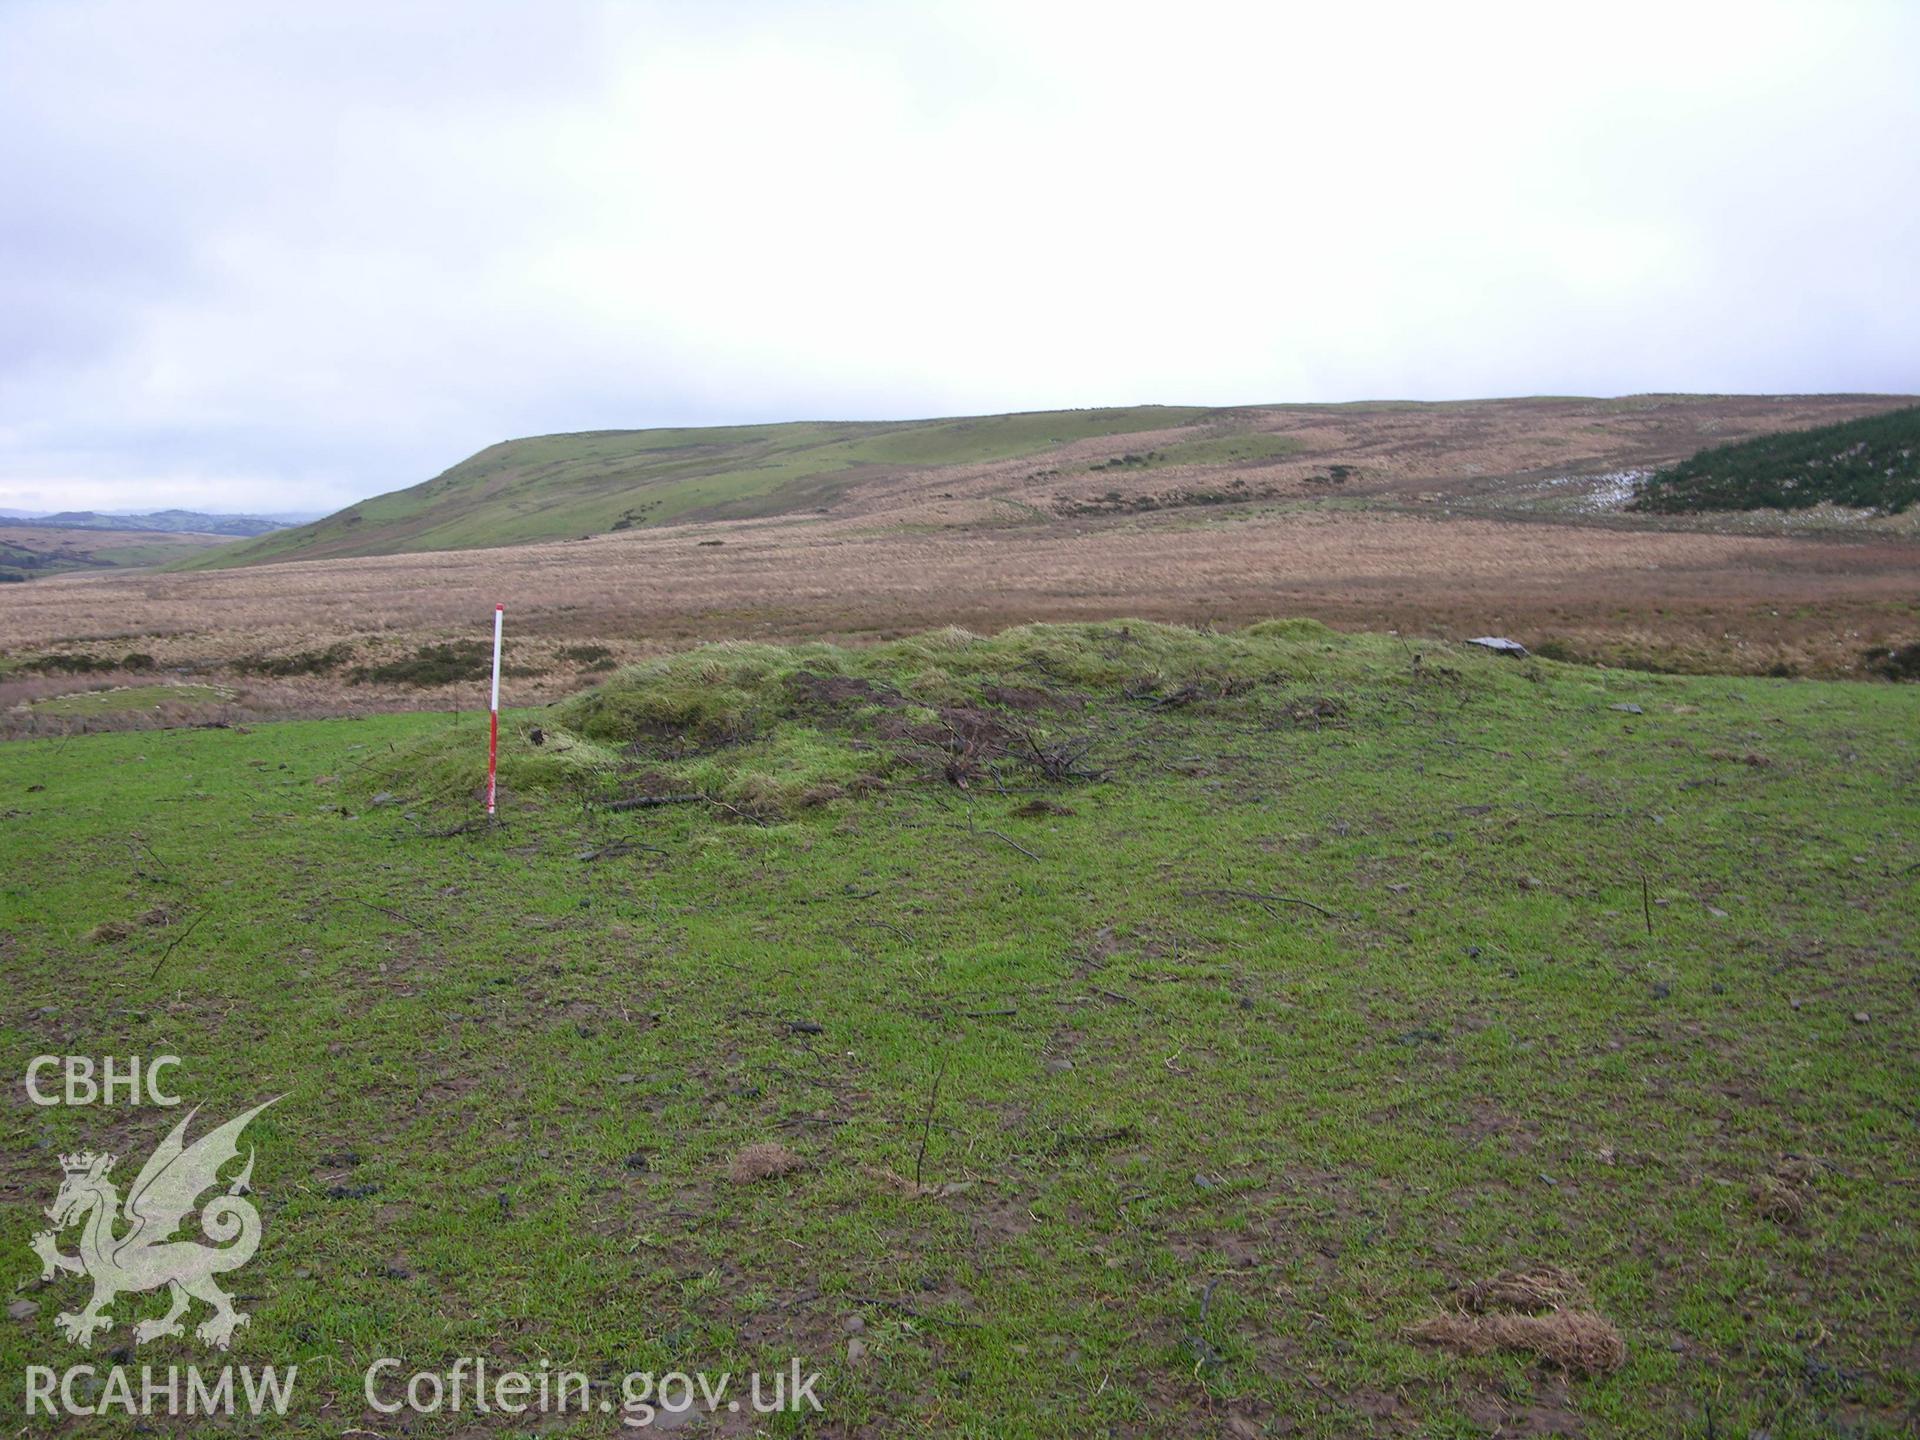 Colour digital photograph showing view of a clearance cairn nr Carneddau - part of archaeological desk based assessment for Esgair Cwmowen, Carno (CAP Report 549).